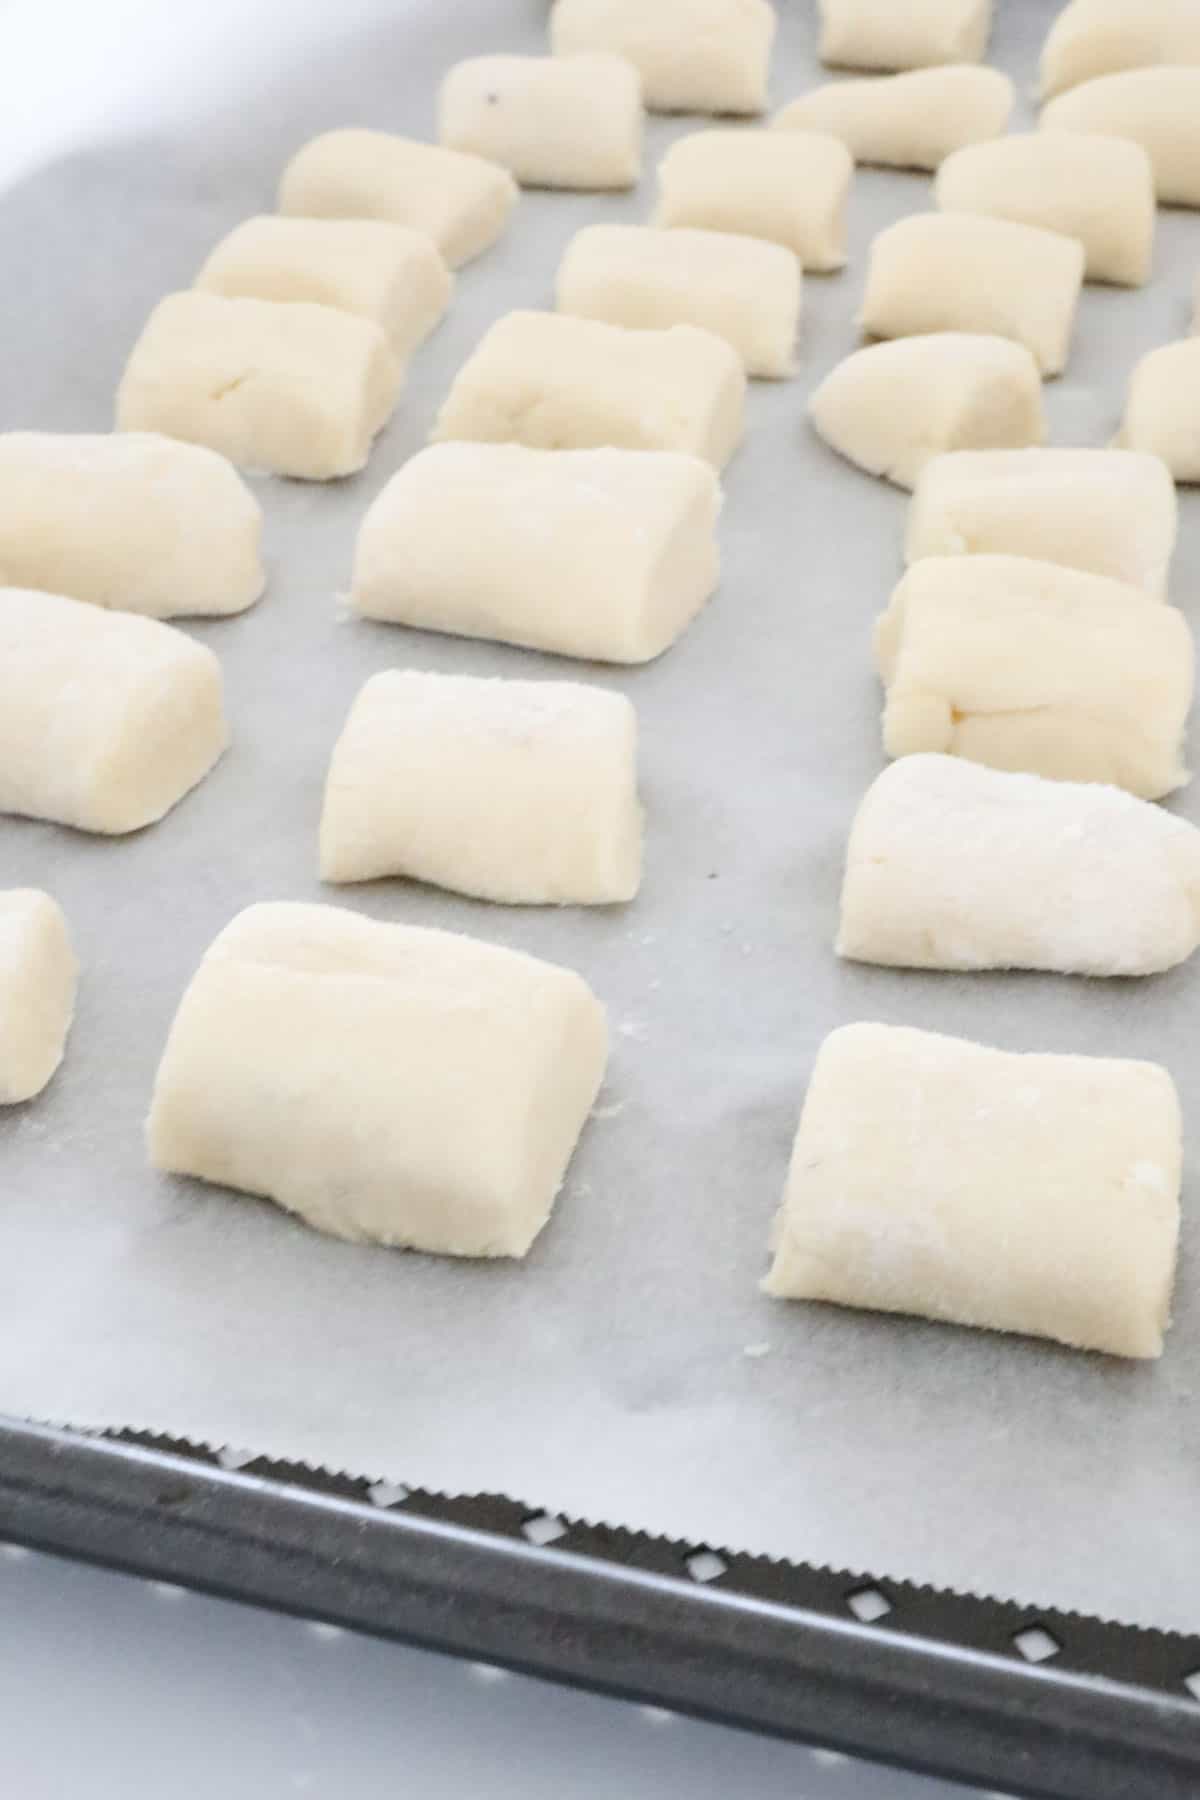 Gnocchi cut and placed on greaseproof paper.